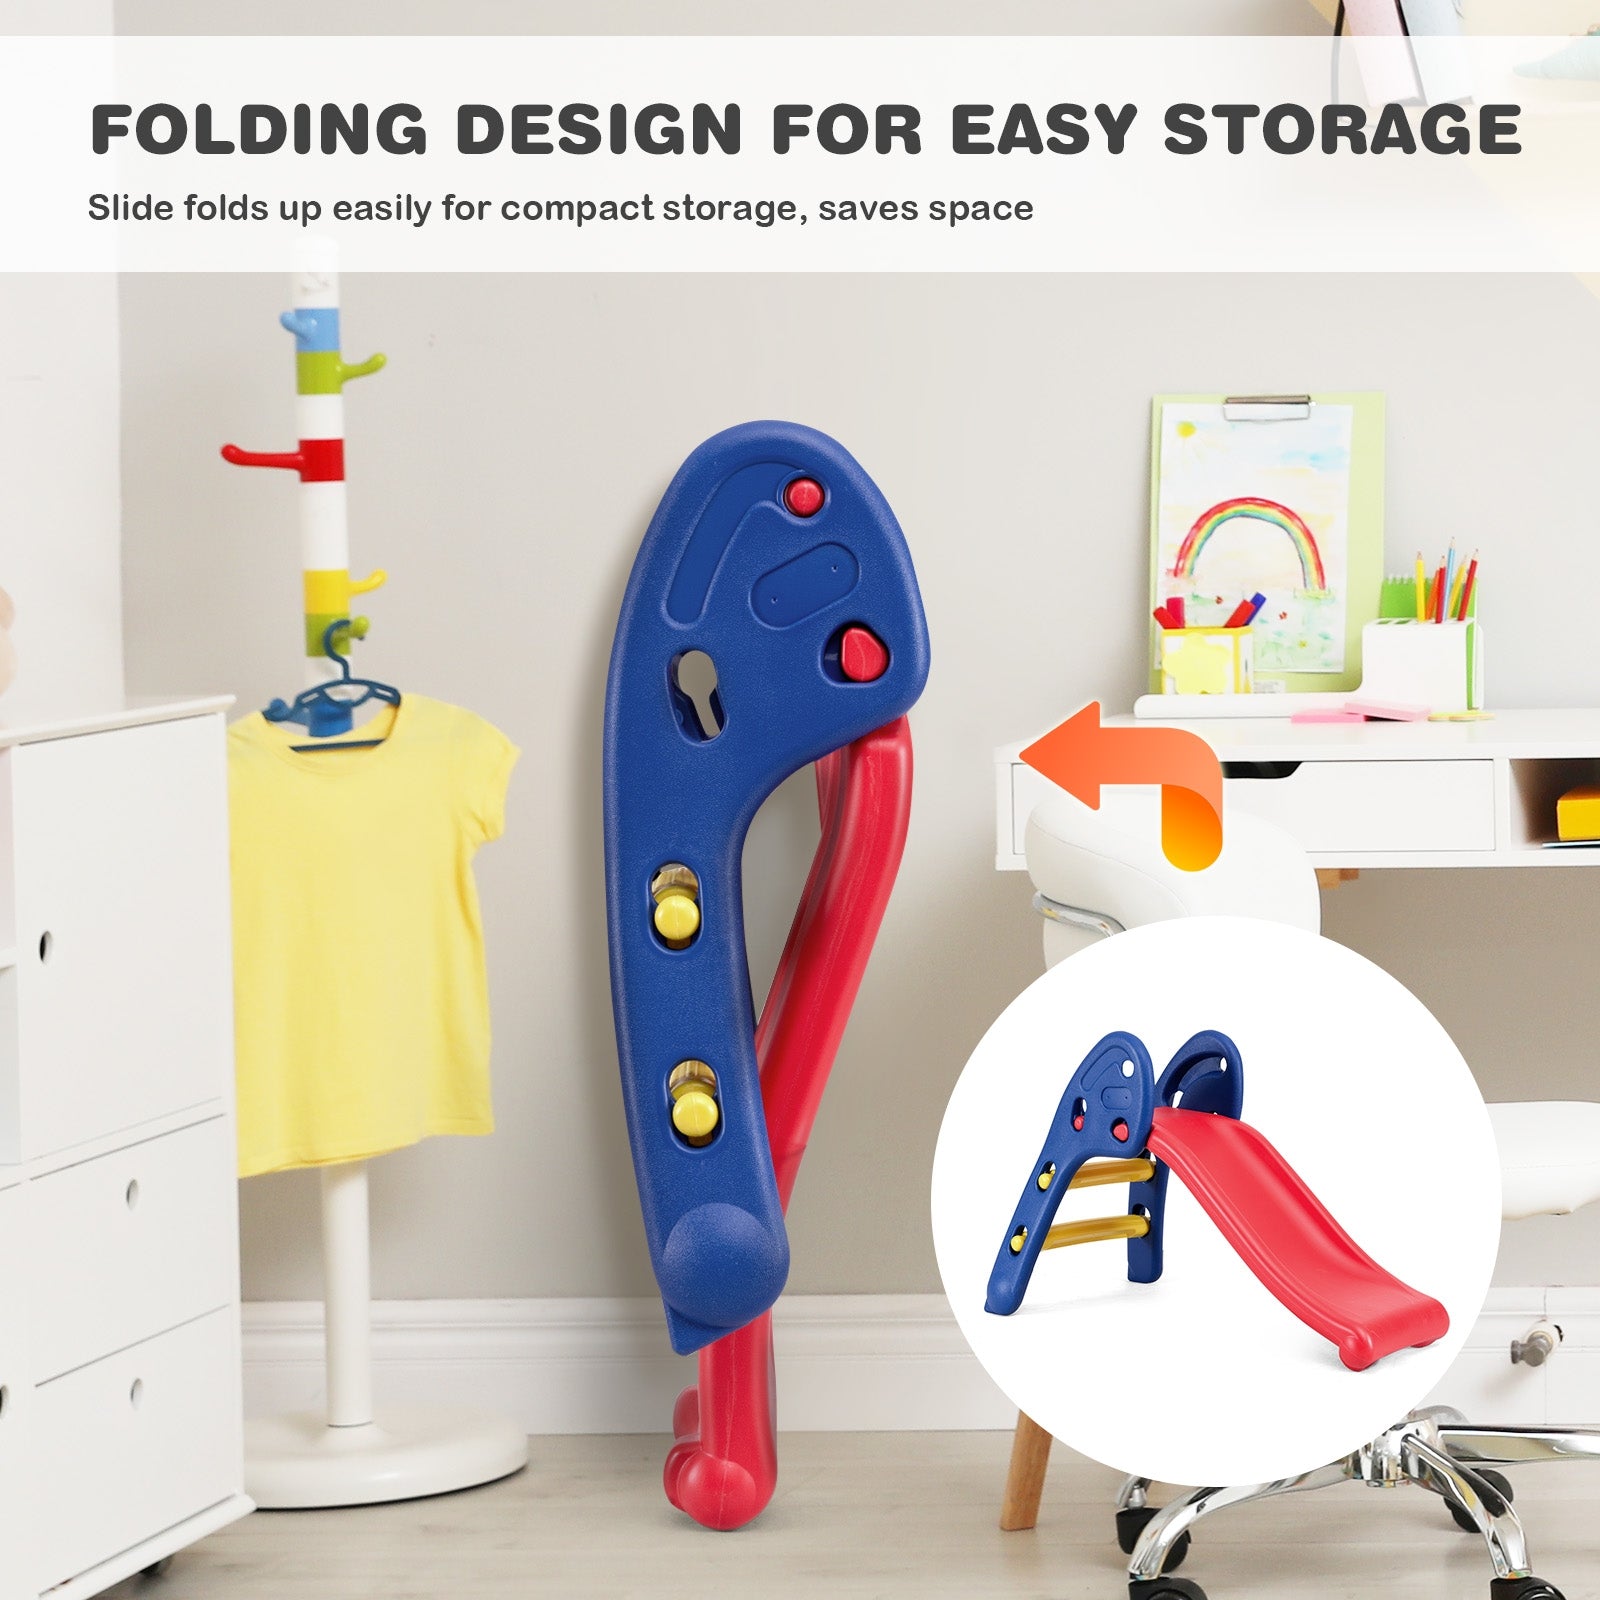 Lightweight and space-saving folding design:  Designed to maximize convenience, our slide can be easily folded and stored when not in use, reducing floor clutter. For added versatility, it can even be hung for storage. Its lightweight and portable construction allows for effortless indoor and outdoor relocation.